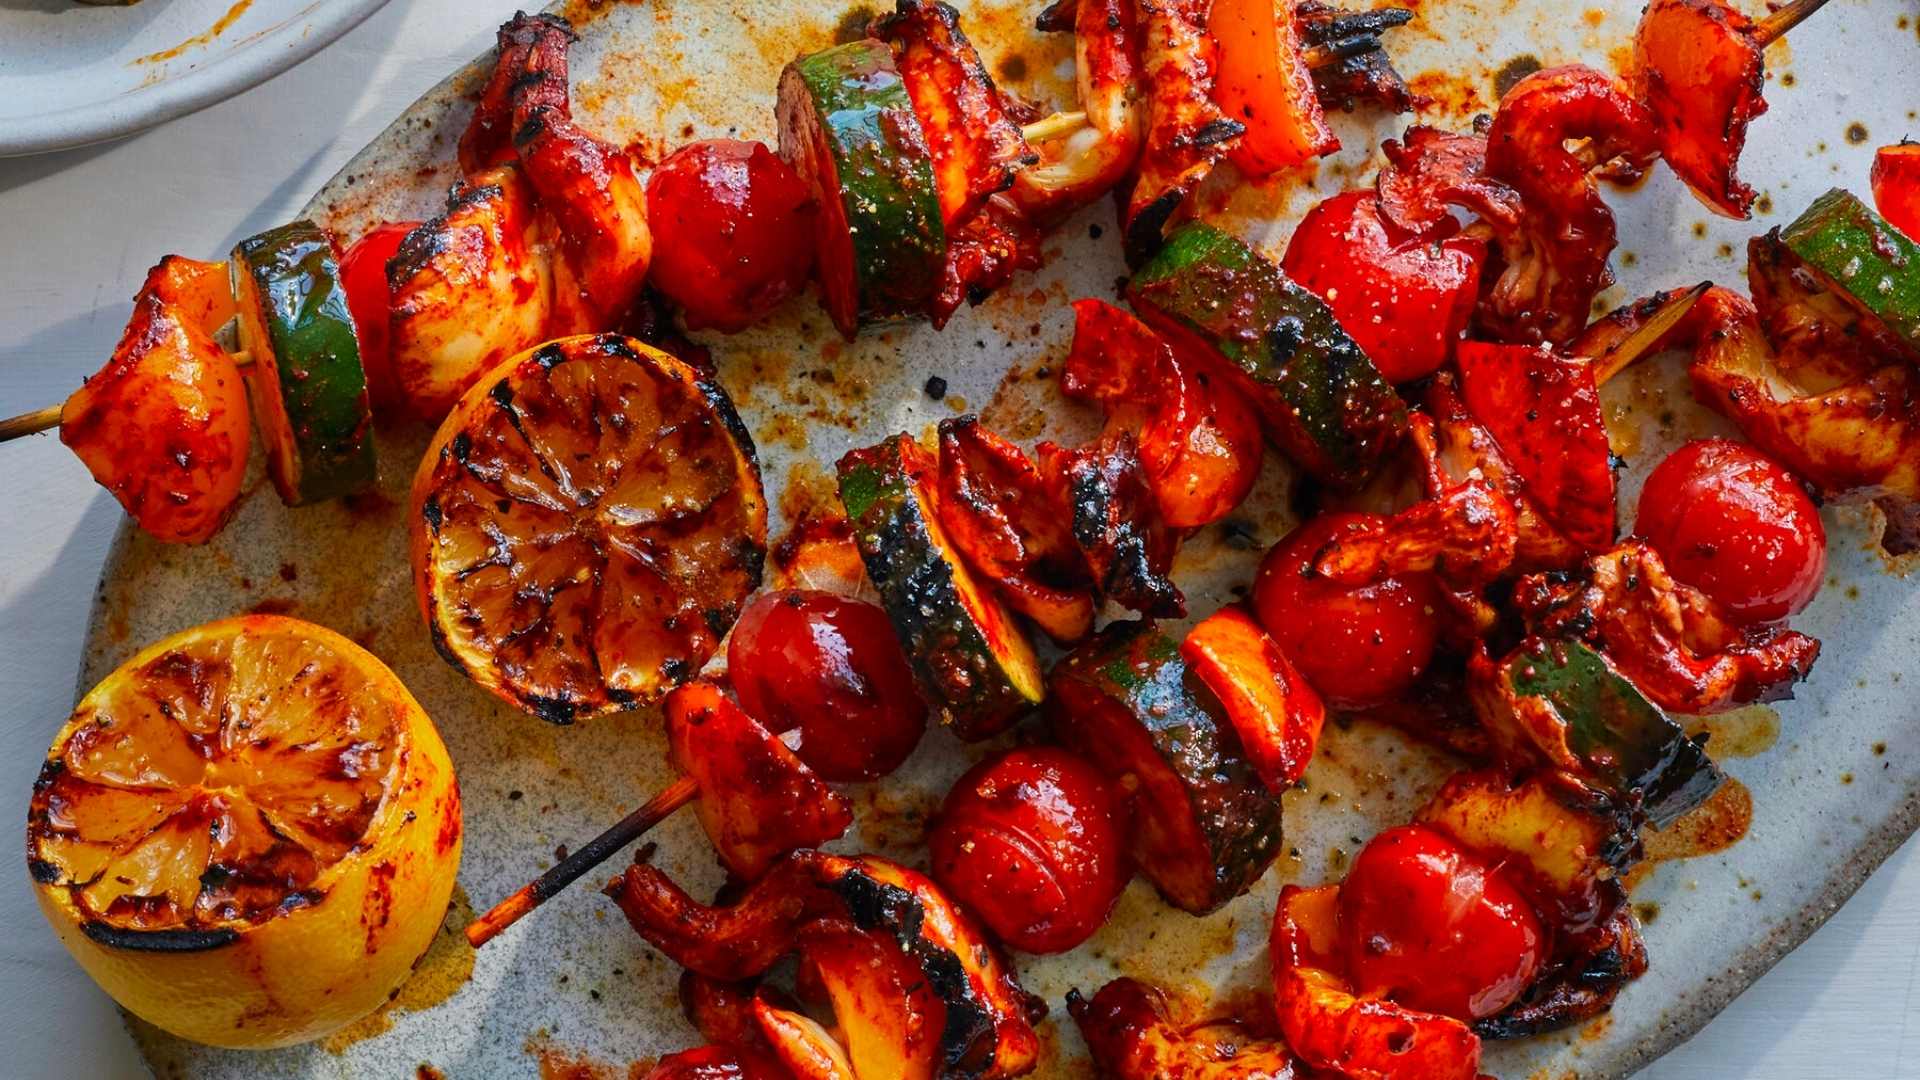 Fire Up the Grill for This Flavor-Packed Tomato Kebab Recipe A Favorite You Won't Want to Miss 4